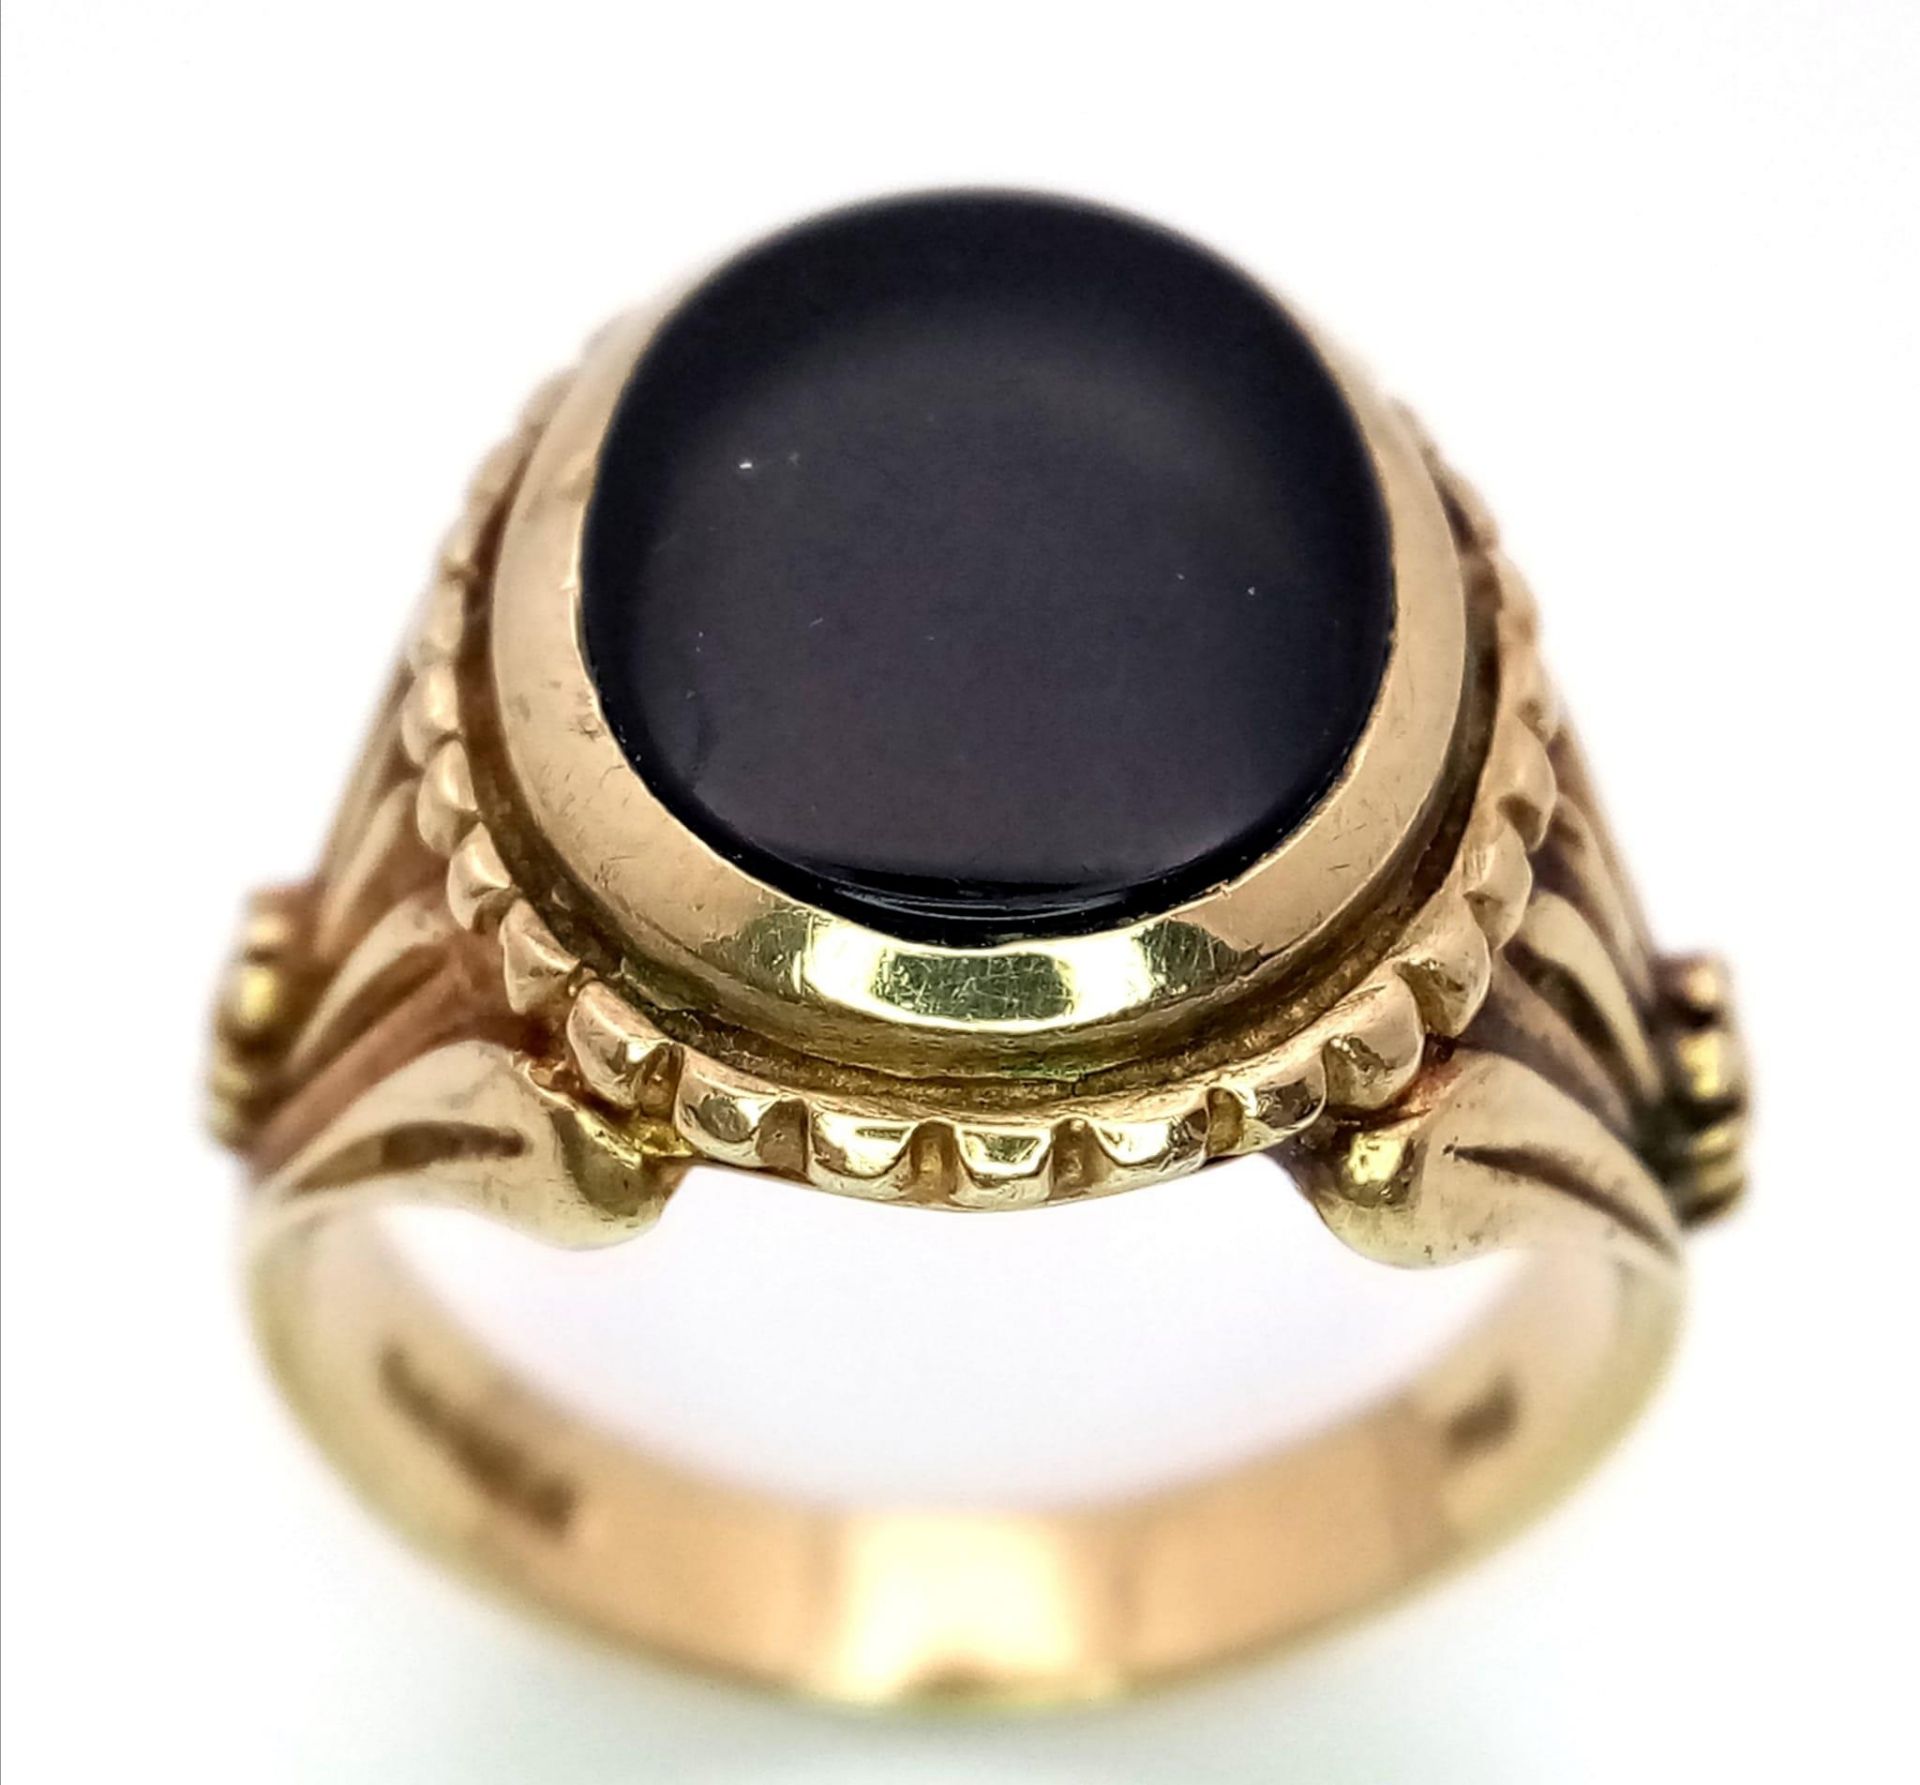 A GENTS 9K GOLD REGAL LOOKING SIGNET RING WITH BLACK ONYX CENTRE STONE AND ORNATE SHOULDER WORK.